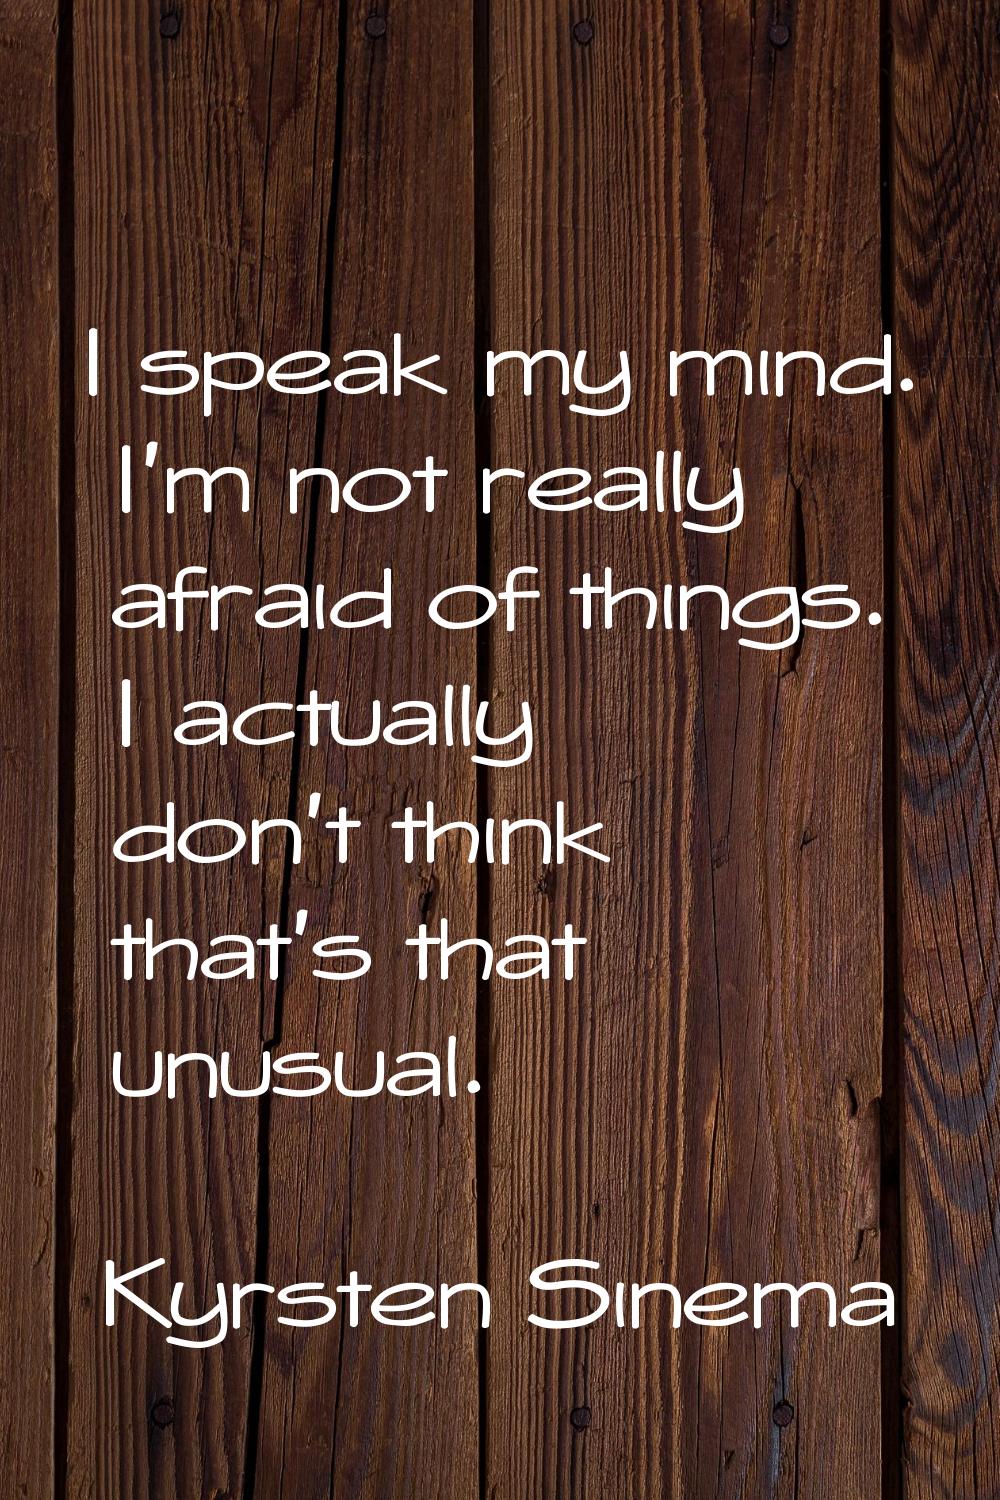 I speak my mind. I'm not really afraid of things. I actually don't think that's that unusual.